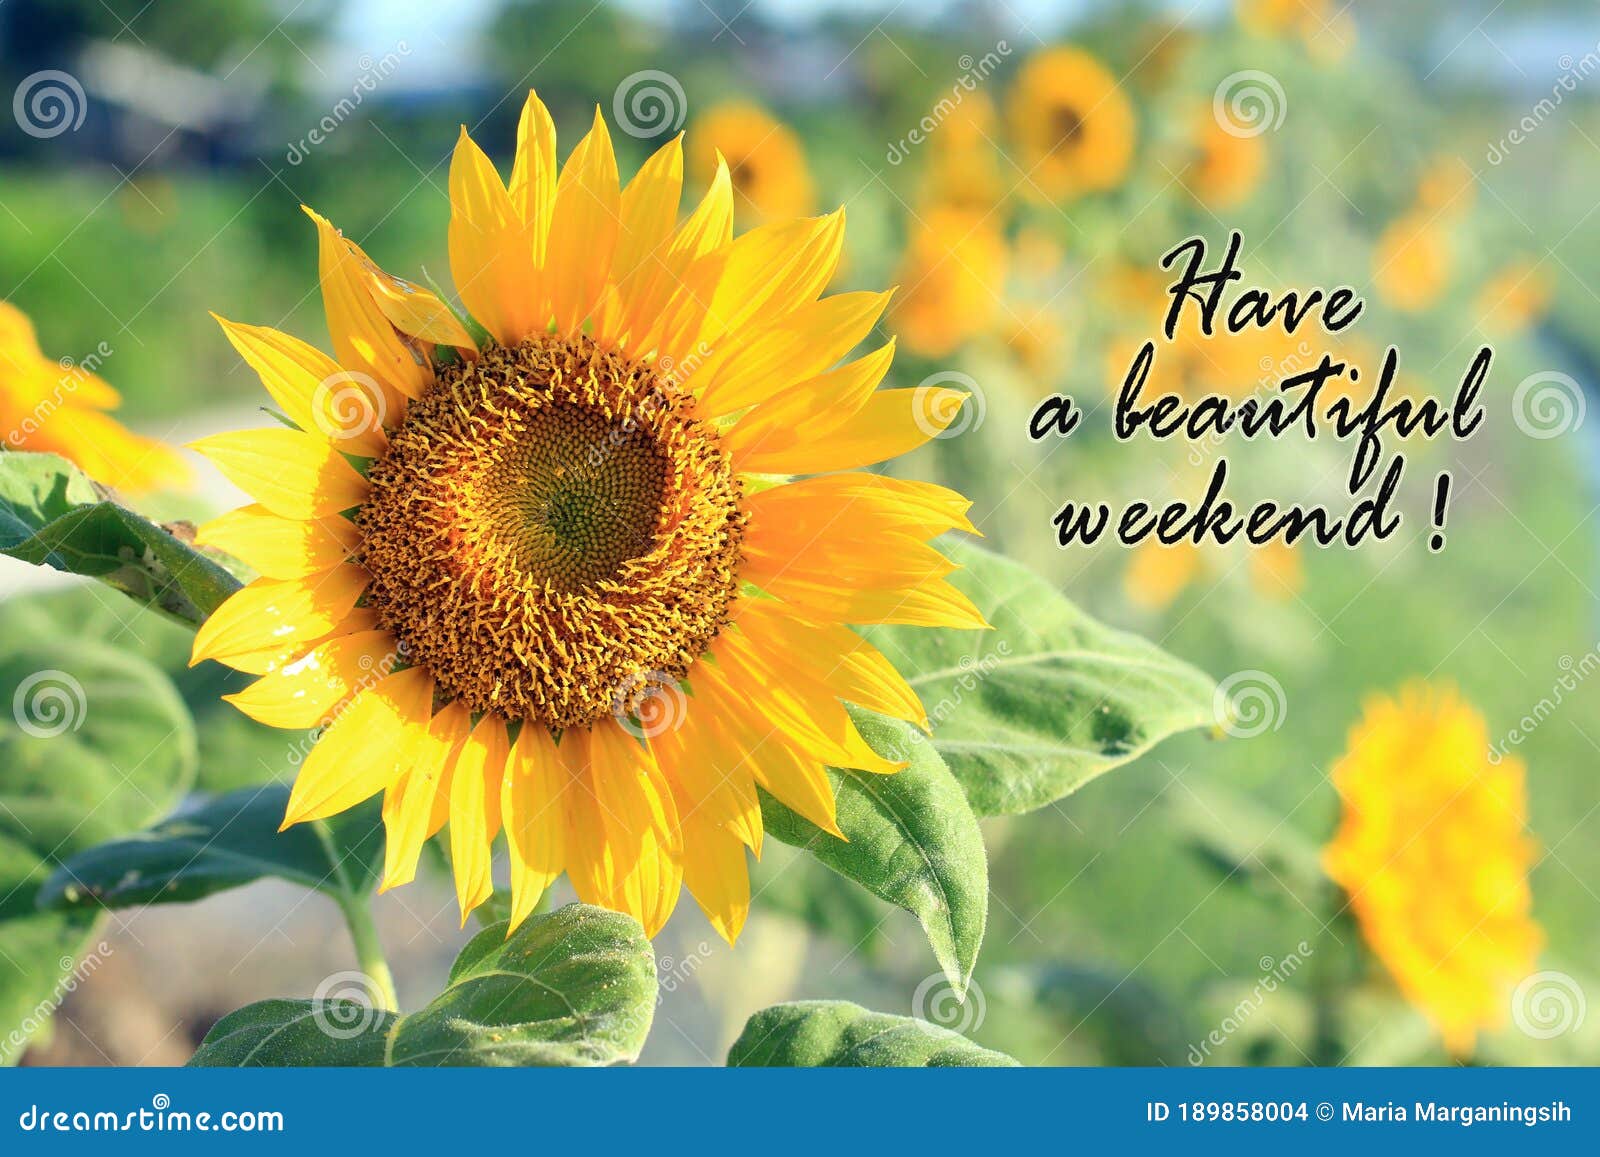 have a beautiful weekend. card and greeting weekend concept with beautiful sunflower blossom in the summer or spring season.